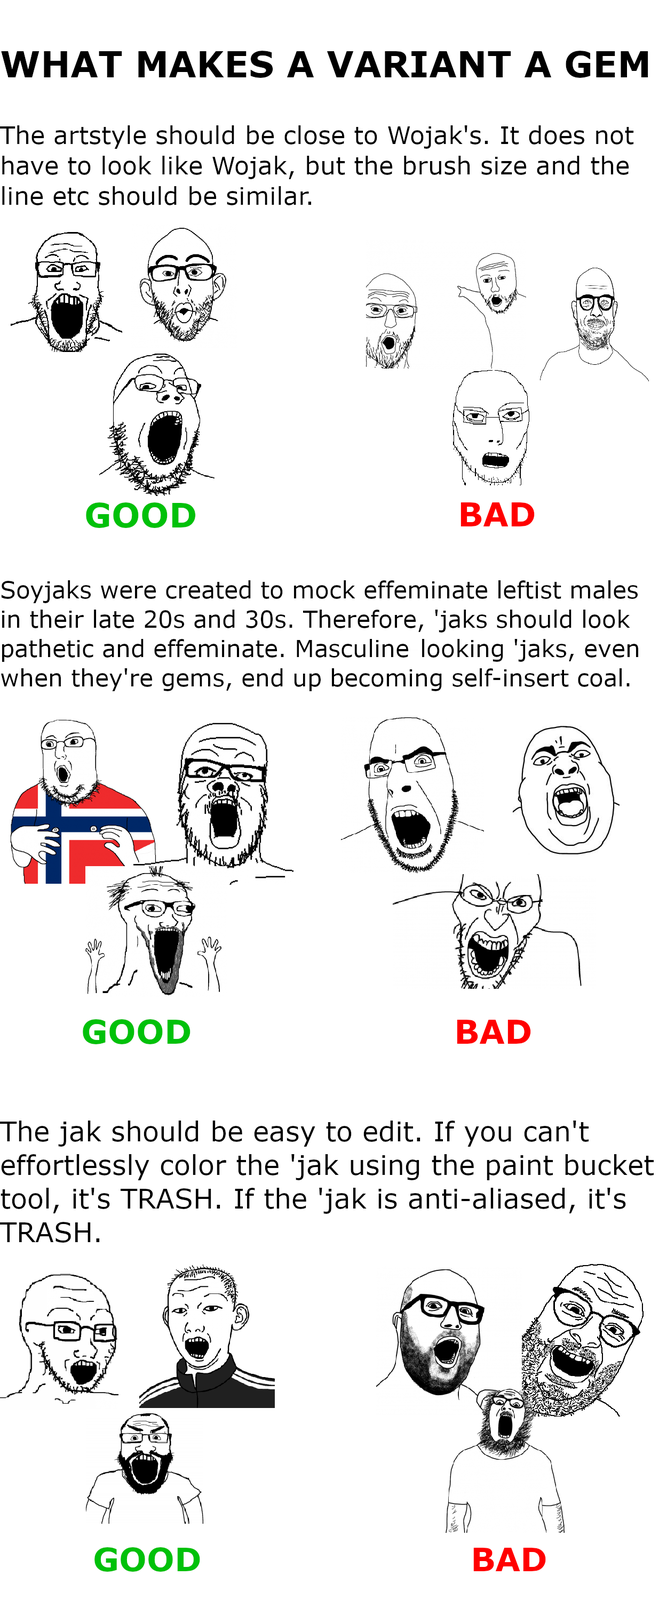 WHAT MAKES A VARIANT A GEM The artstyle should be close to Wojak's. It does not have to look like Wojak, but the brush size and the line etc should be similar. GOOD BAD Soyjaks were created to mock effeminate leftist males in their late 20s and 30s. Therefore, 'jaks should look pathetic and effeminate. Masculine looking 'jaks, even when they're gems, end up becoming self-insert coal. GOOD JID. BAD The jak should be easy to edit. If you can't effortlessly color the 'jak using the paint bucket tool, it's TRASH. If the 'jak is anti-aliased, it's TRASH. GOOD BAD